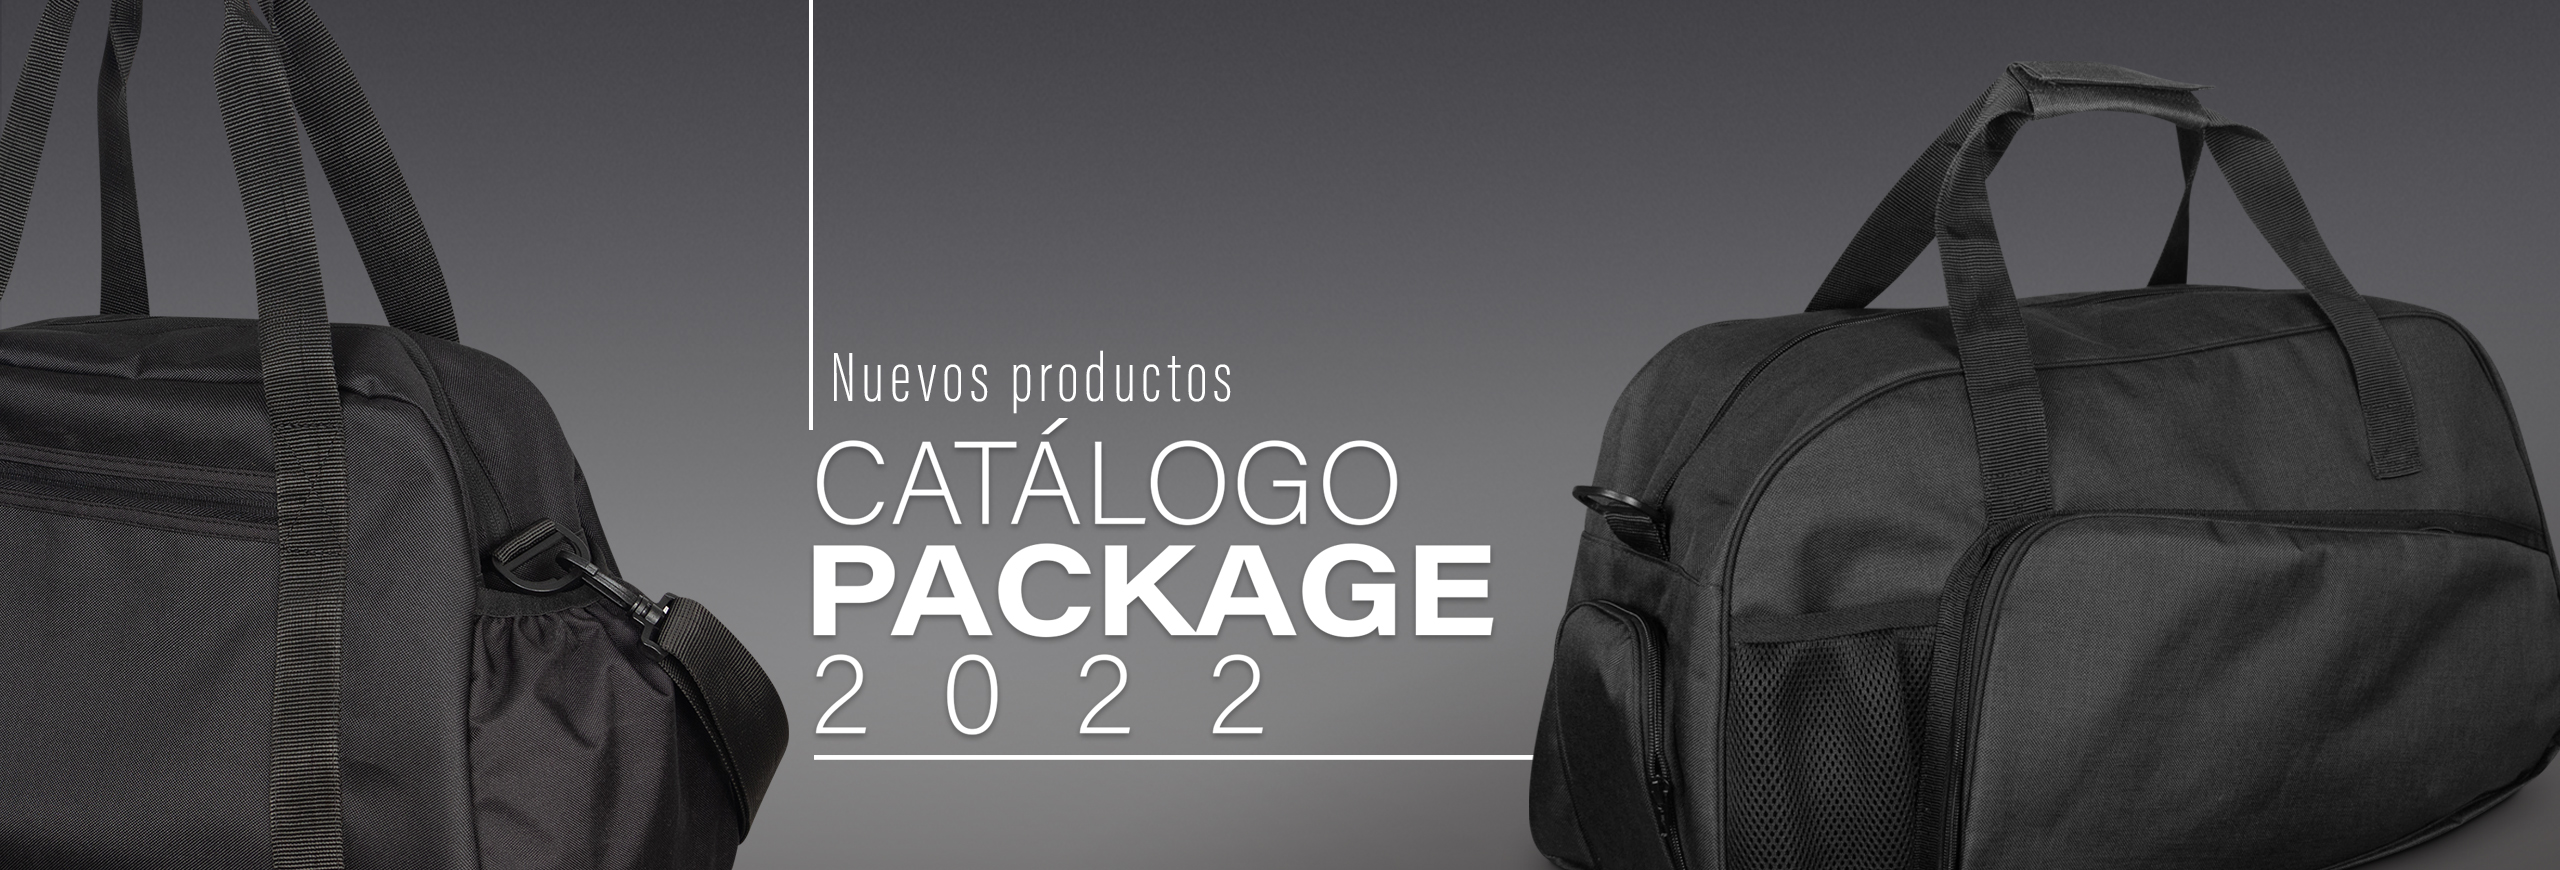 Banners-Packge-2022-Web-Site-Inicio